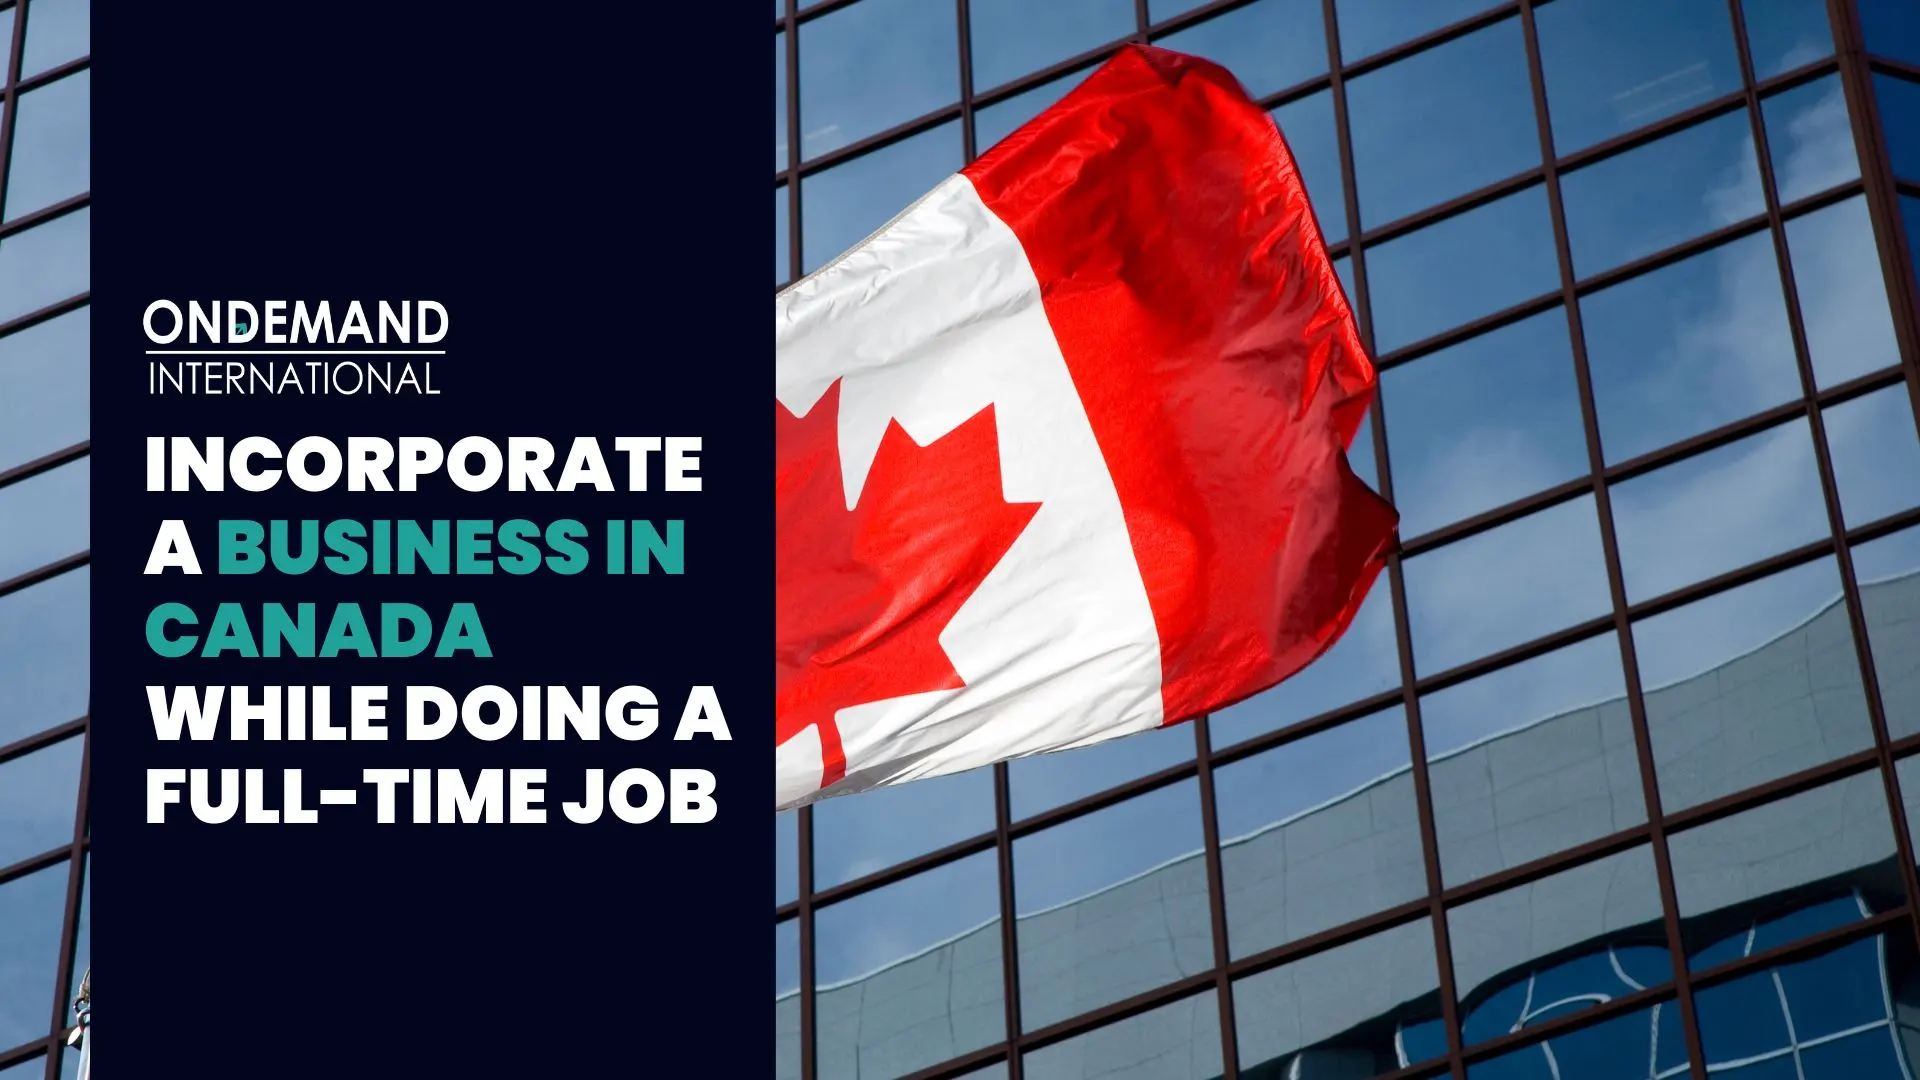 Incorporate A Business In Canada While Doing A Full-Time Job